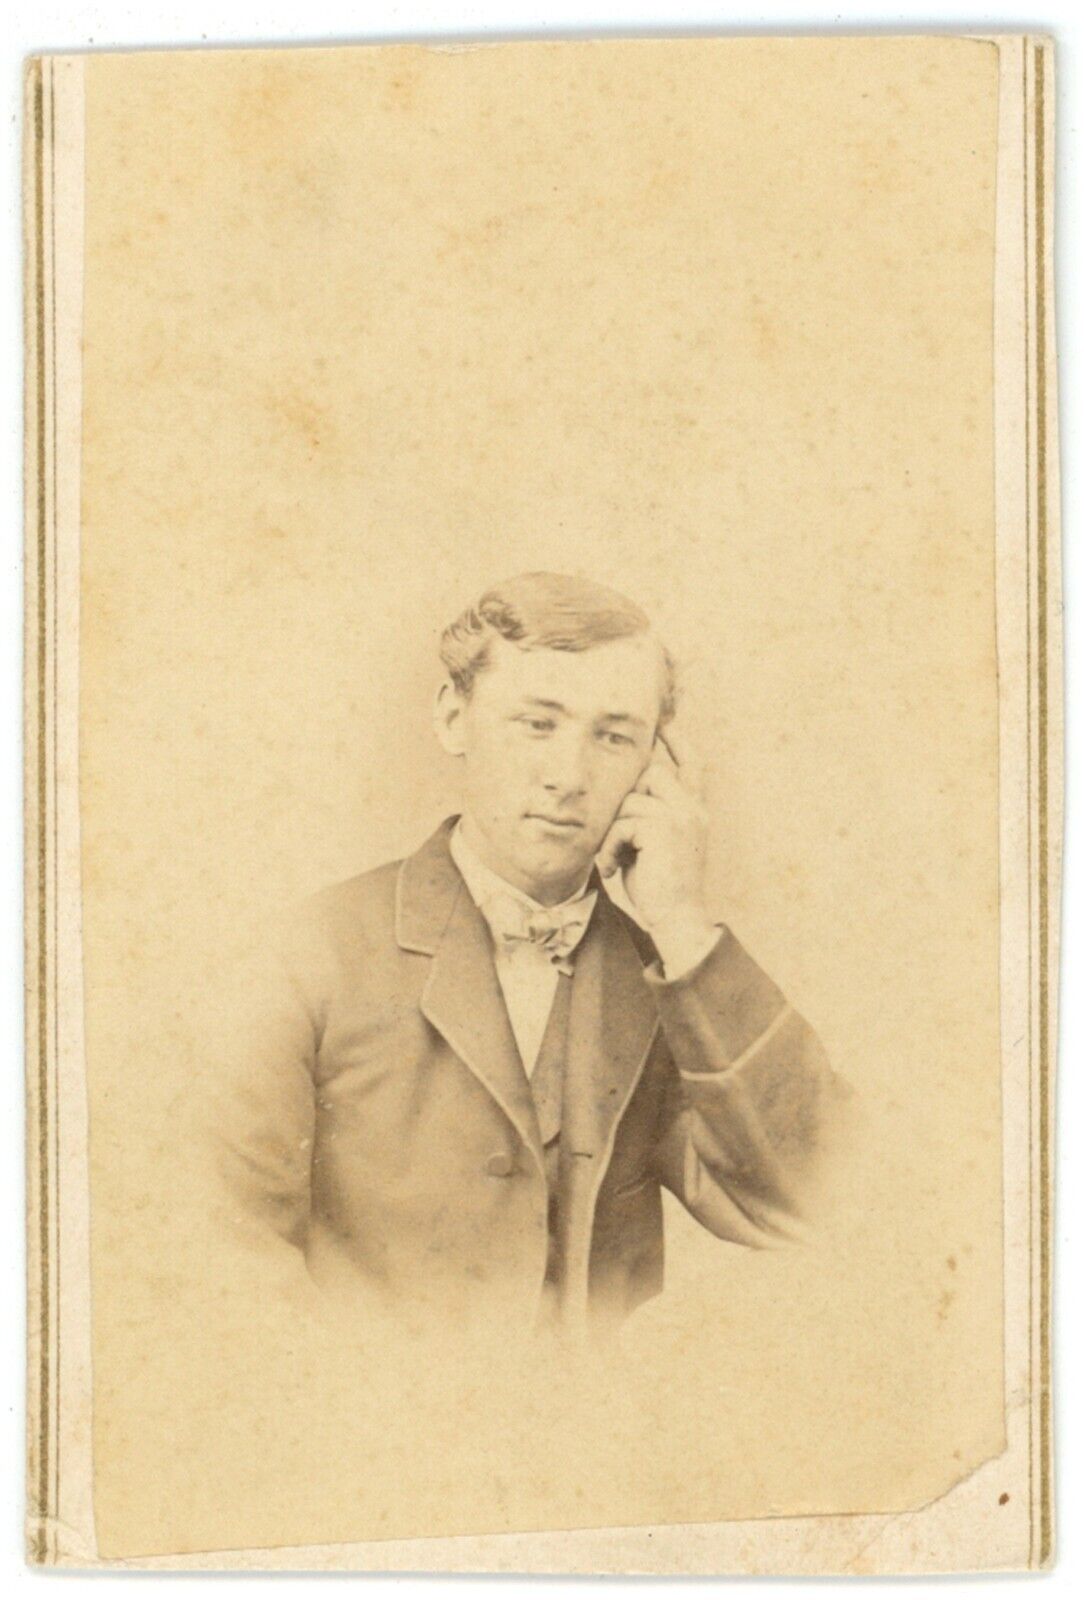 CIRCA 1880'S Trimmed CDV Handsome Thoughtful Young Man Jas. B. Gross Dayton OH